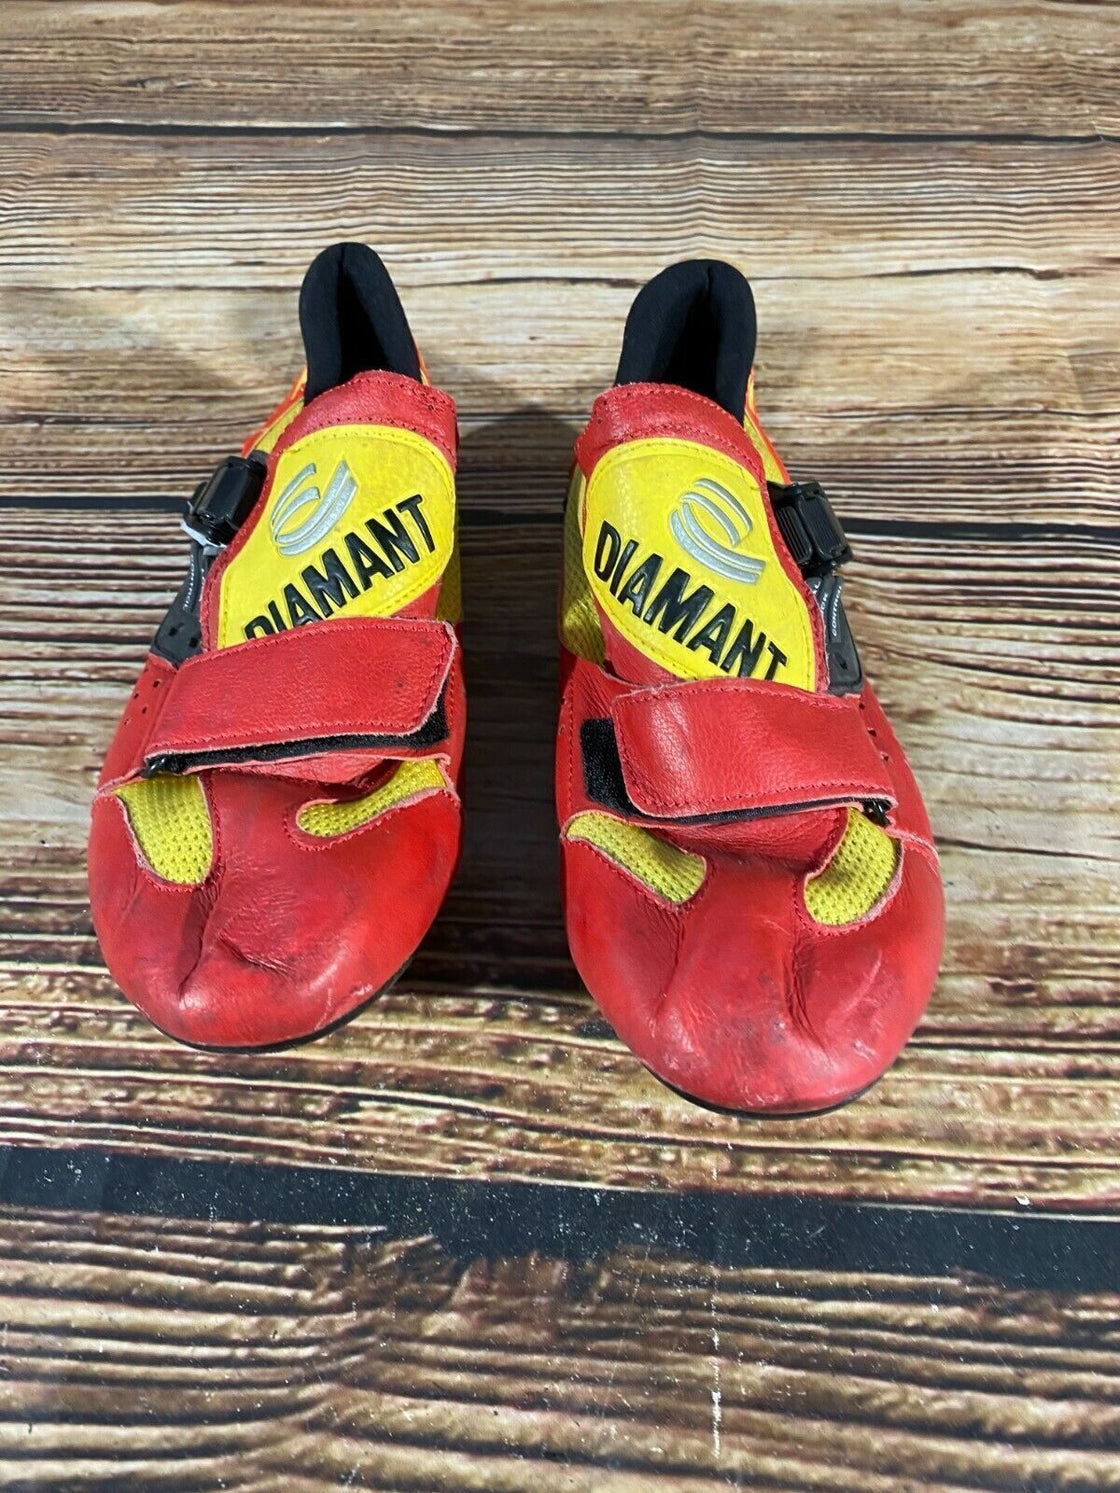 DIAMANT Road Cycling Shoes Clipless Biking Boots Size EU 41 with Cleats